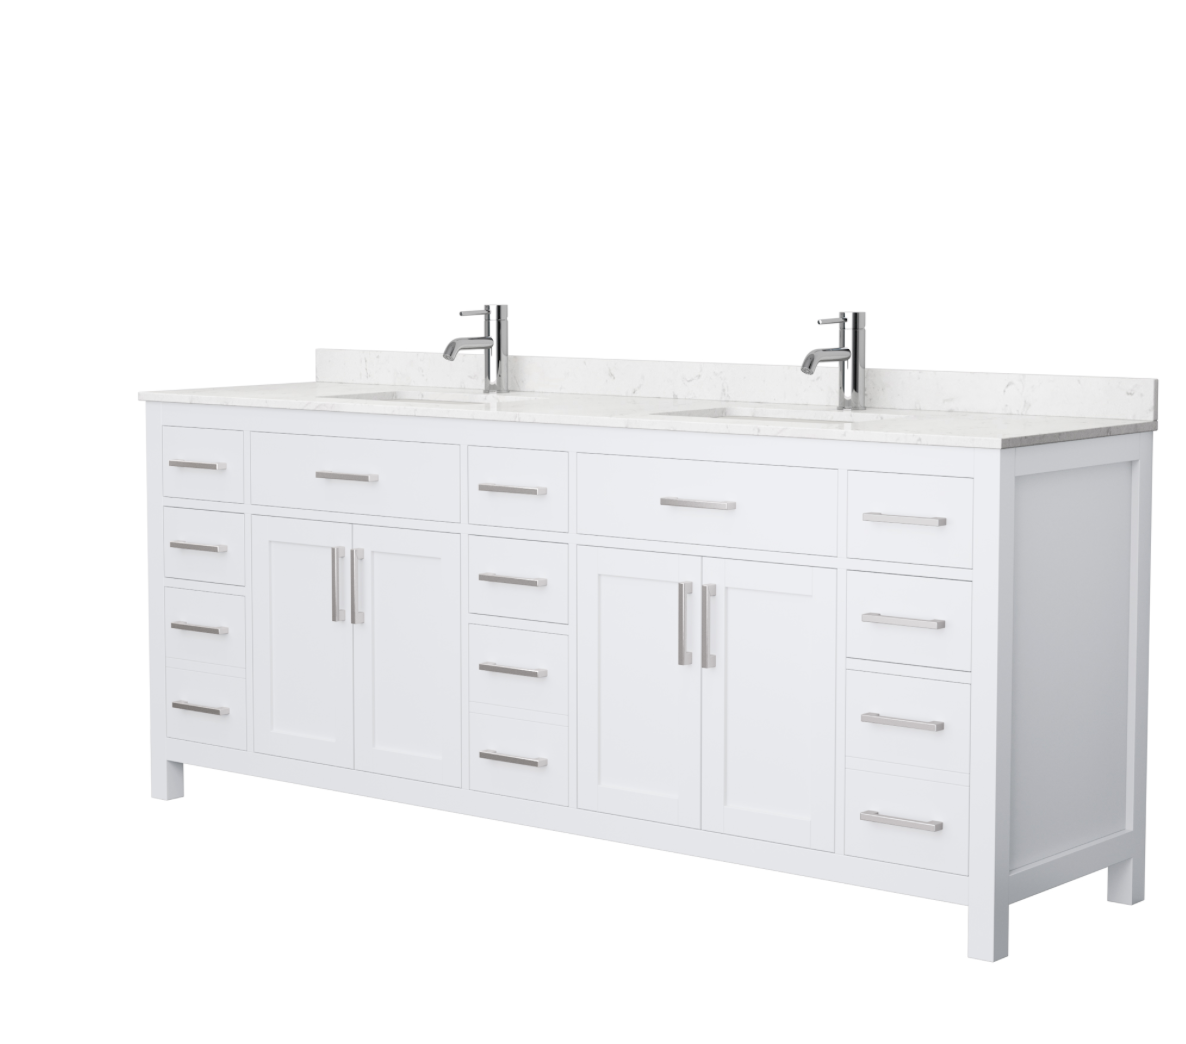 84" Transitional Classic double sink vanity, 3 color options, 2 top options, and hardware option